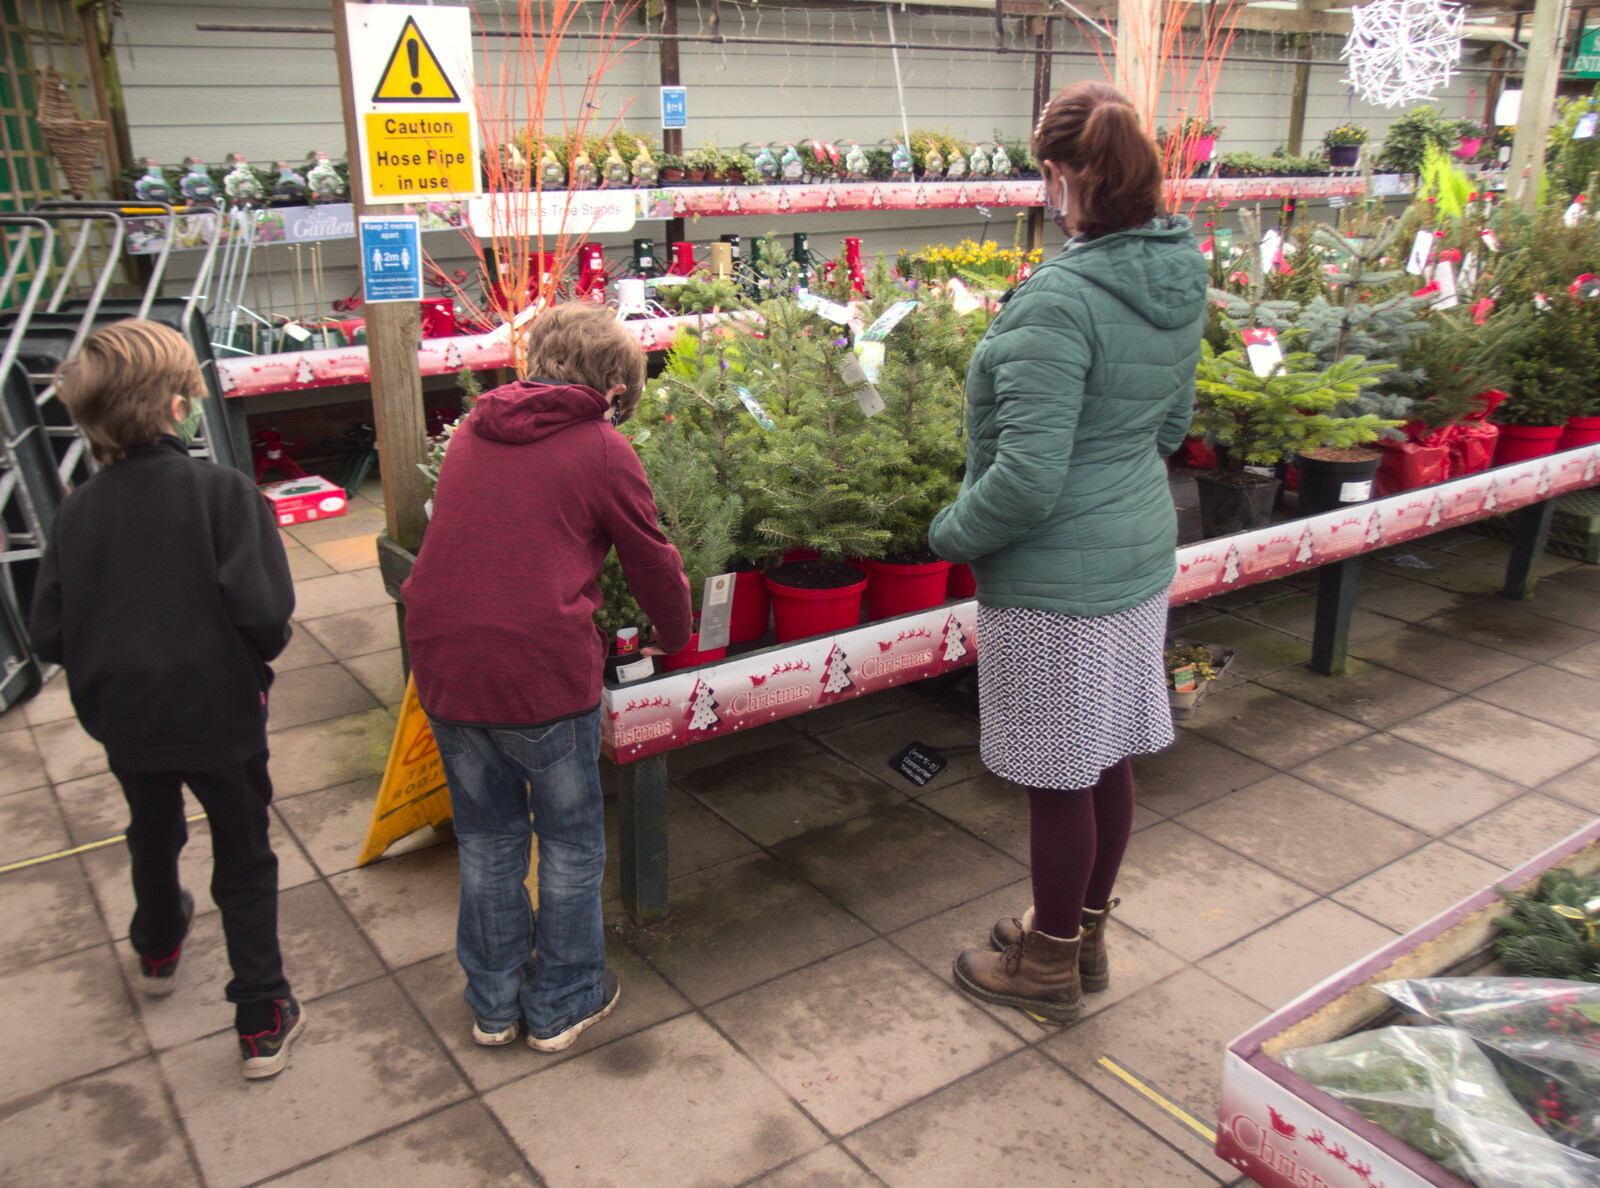 Fred picks a small potted tree for his bedroom from Frosty Rides and a Christmas Tree, Diss Garden Centre, Diss, Norfolk - 29th November 2020